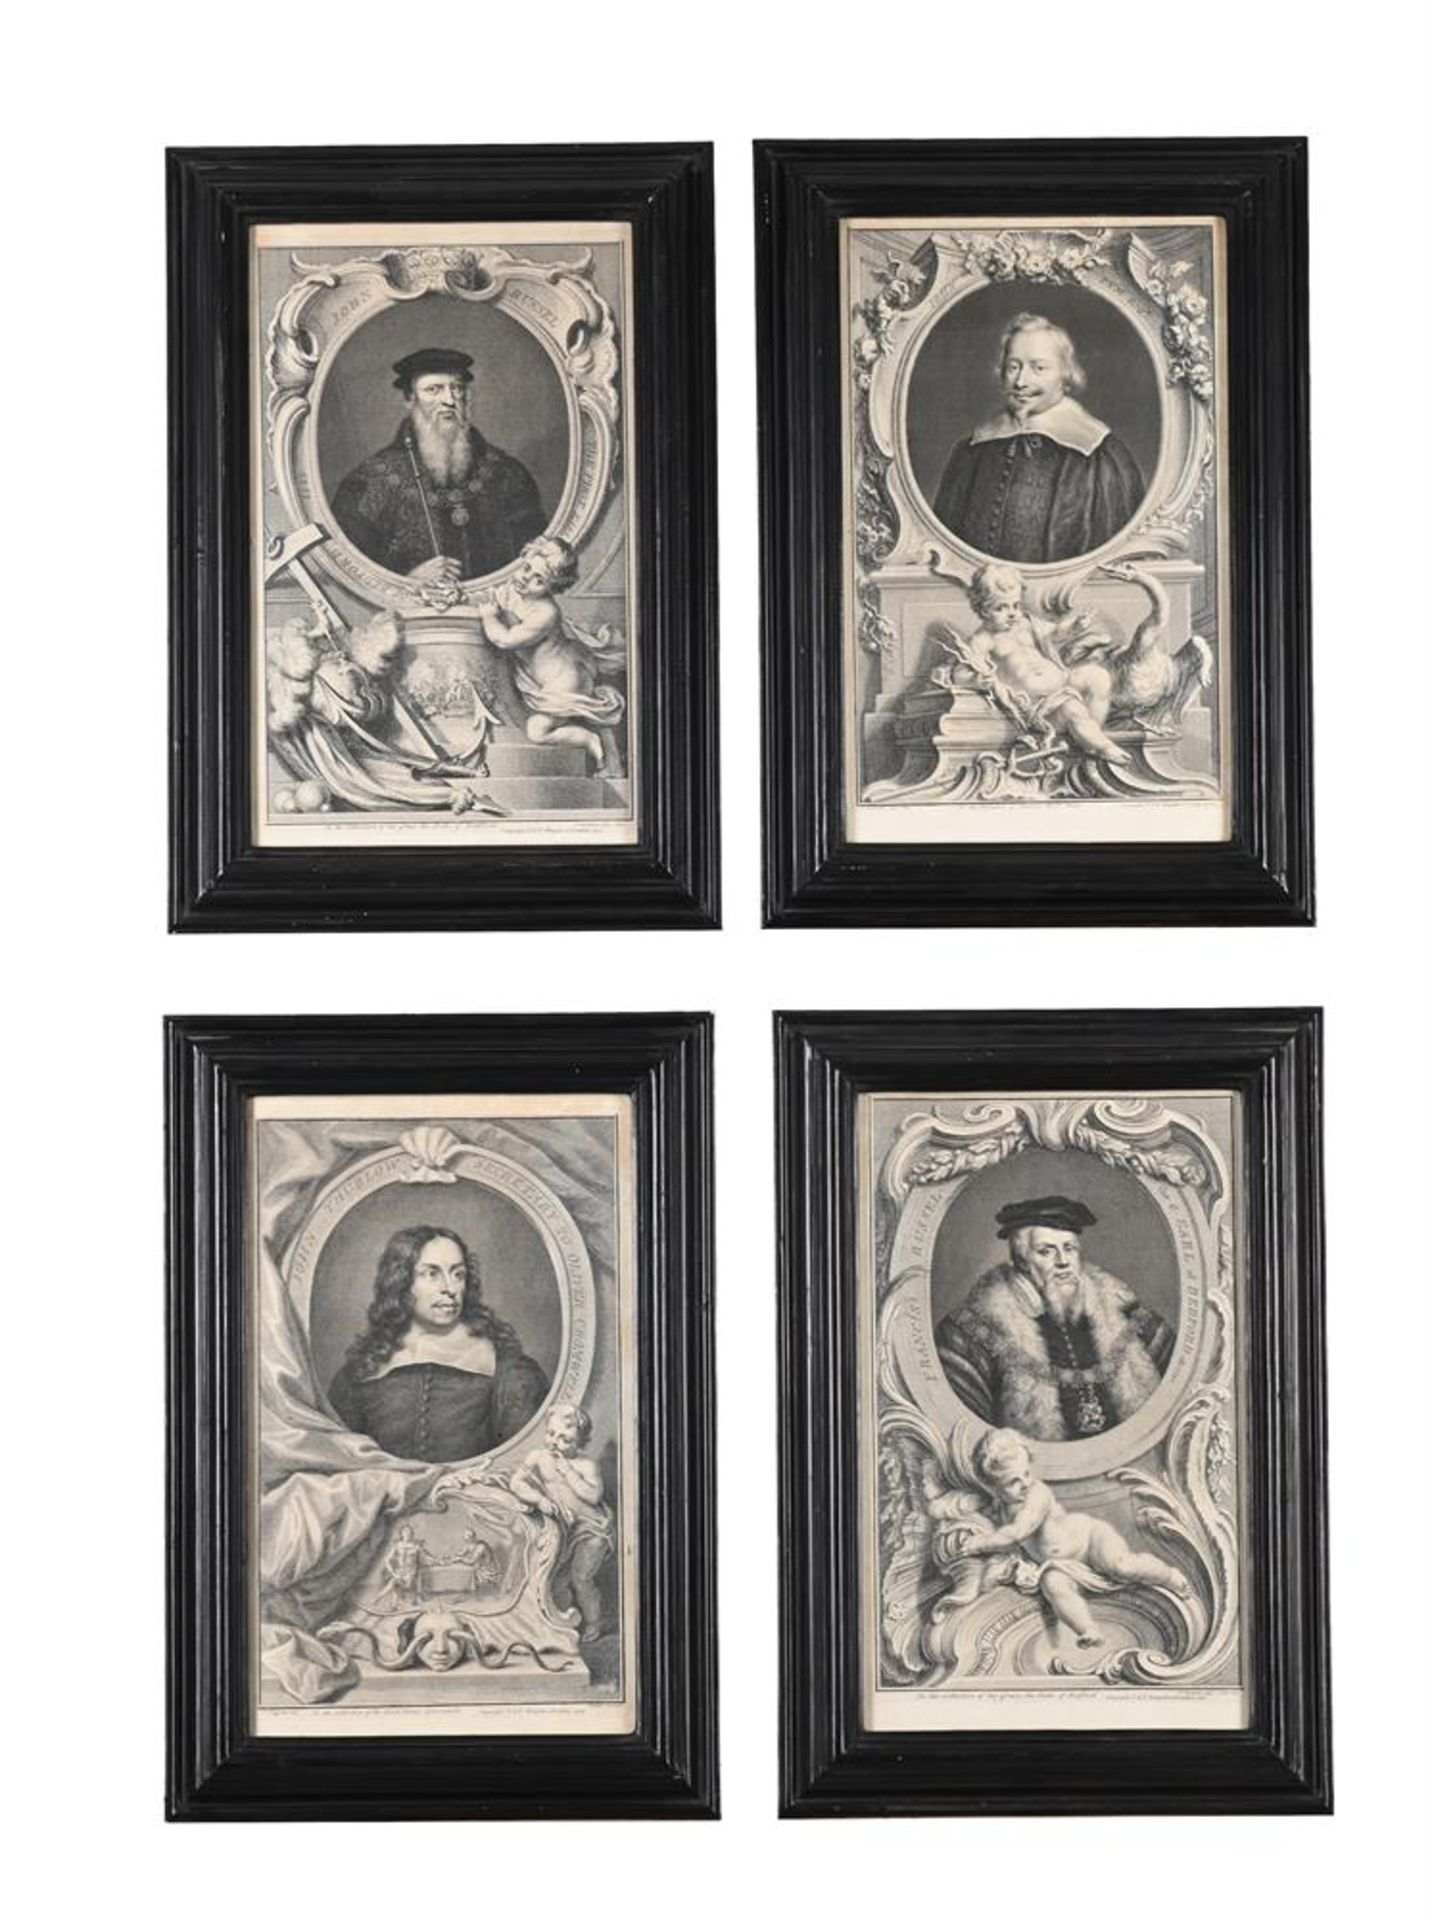 JACOBUS HOUBRAKEN AFTER SIR ANTHONY VAN DYCK, A SET OF TEN PORTRAITS OF DUKES - Image 2 of 5